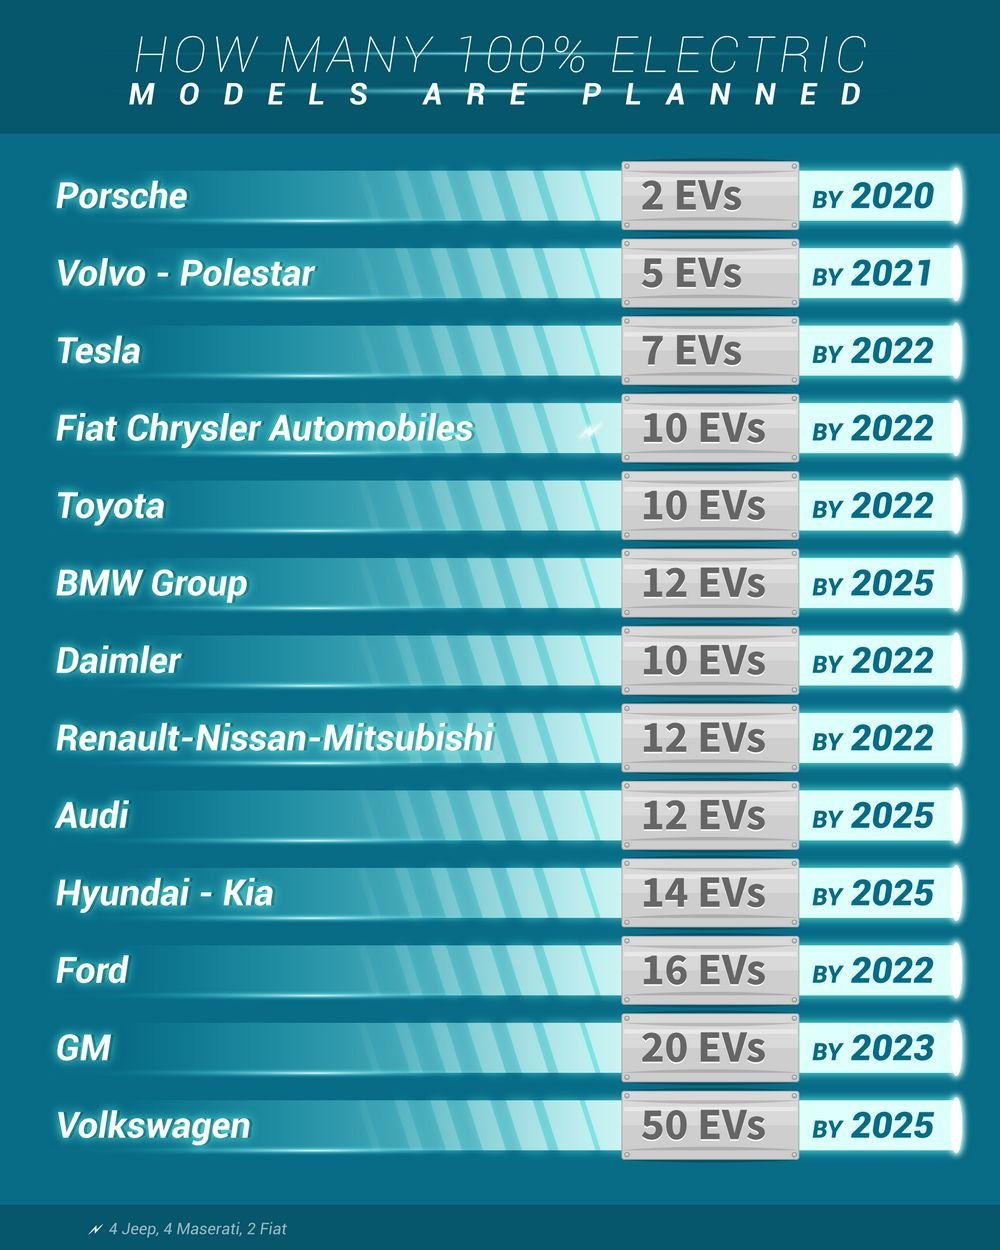 Electric models planned by 2025